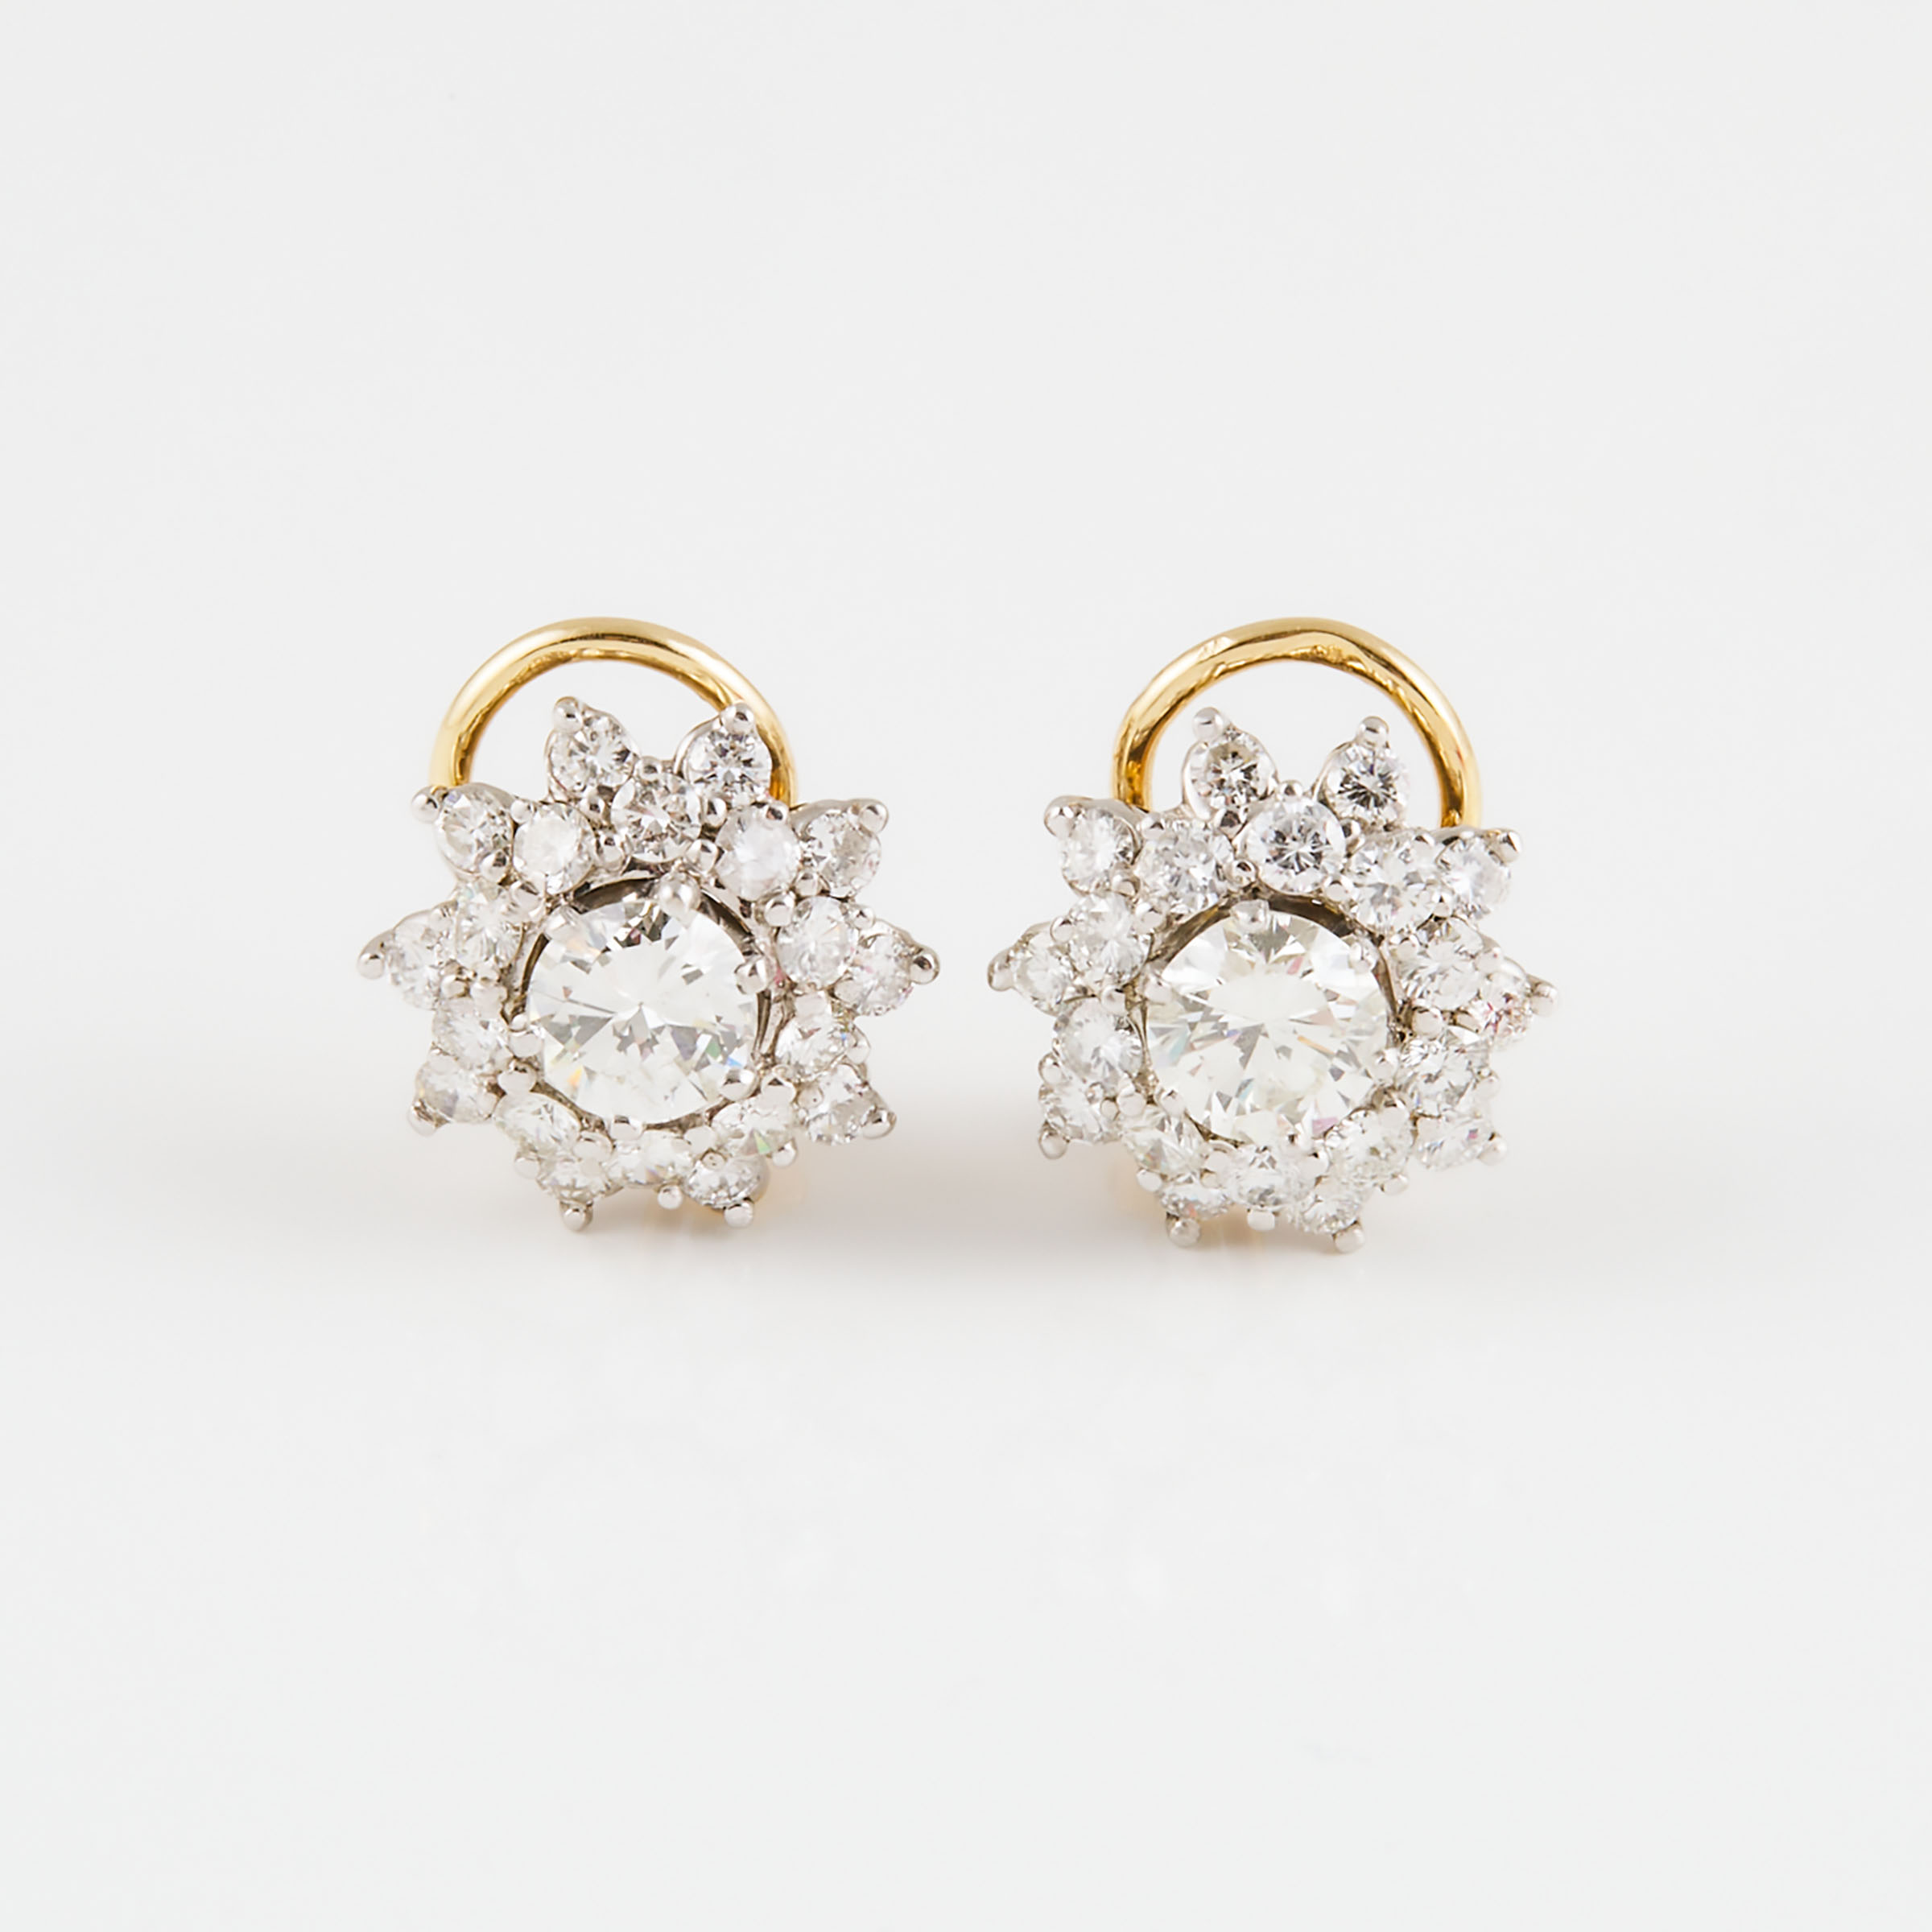 Pair Of 14k/18k Yellow And White Gold Cluster Earrings